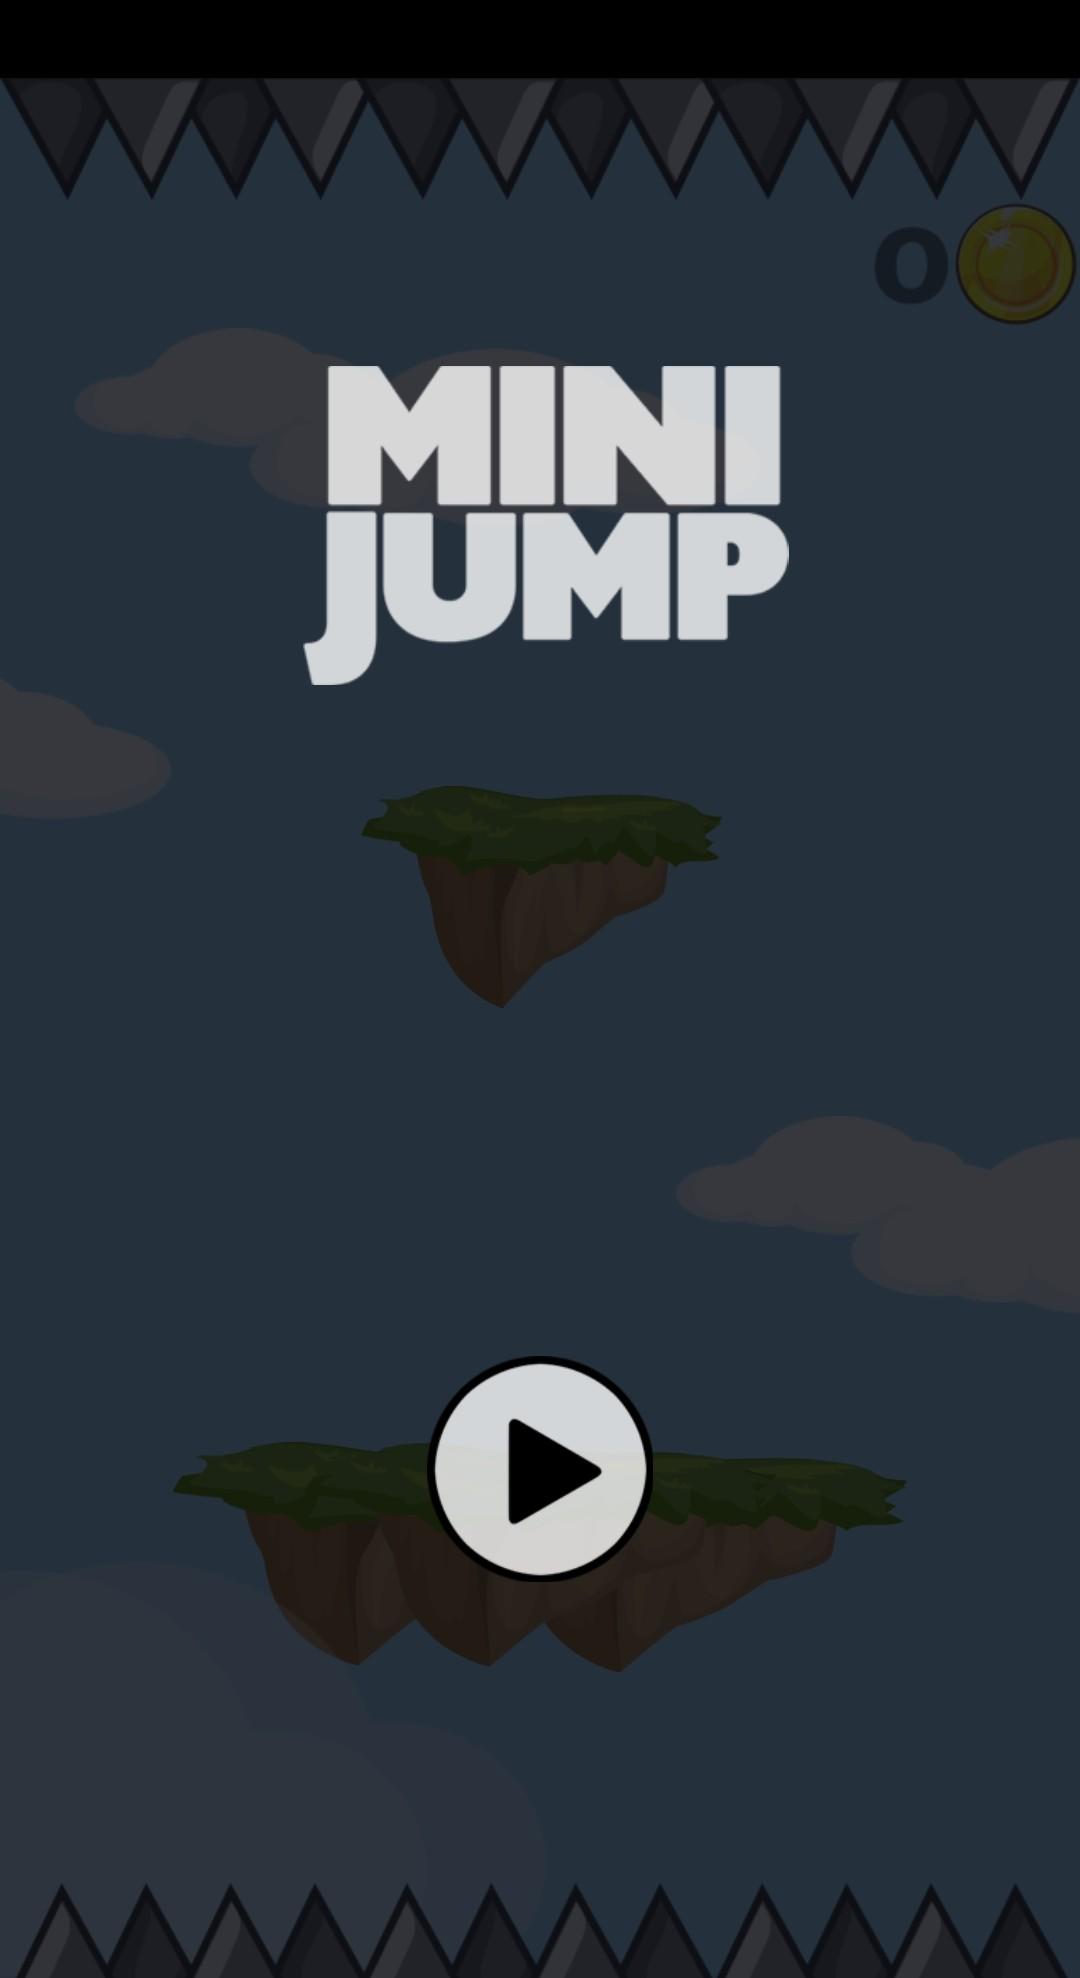 Mine Stack Jump: Block High APK for Android Download